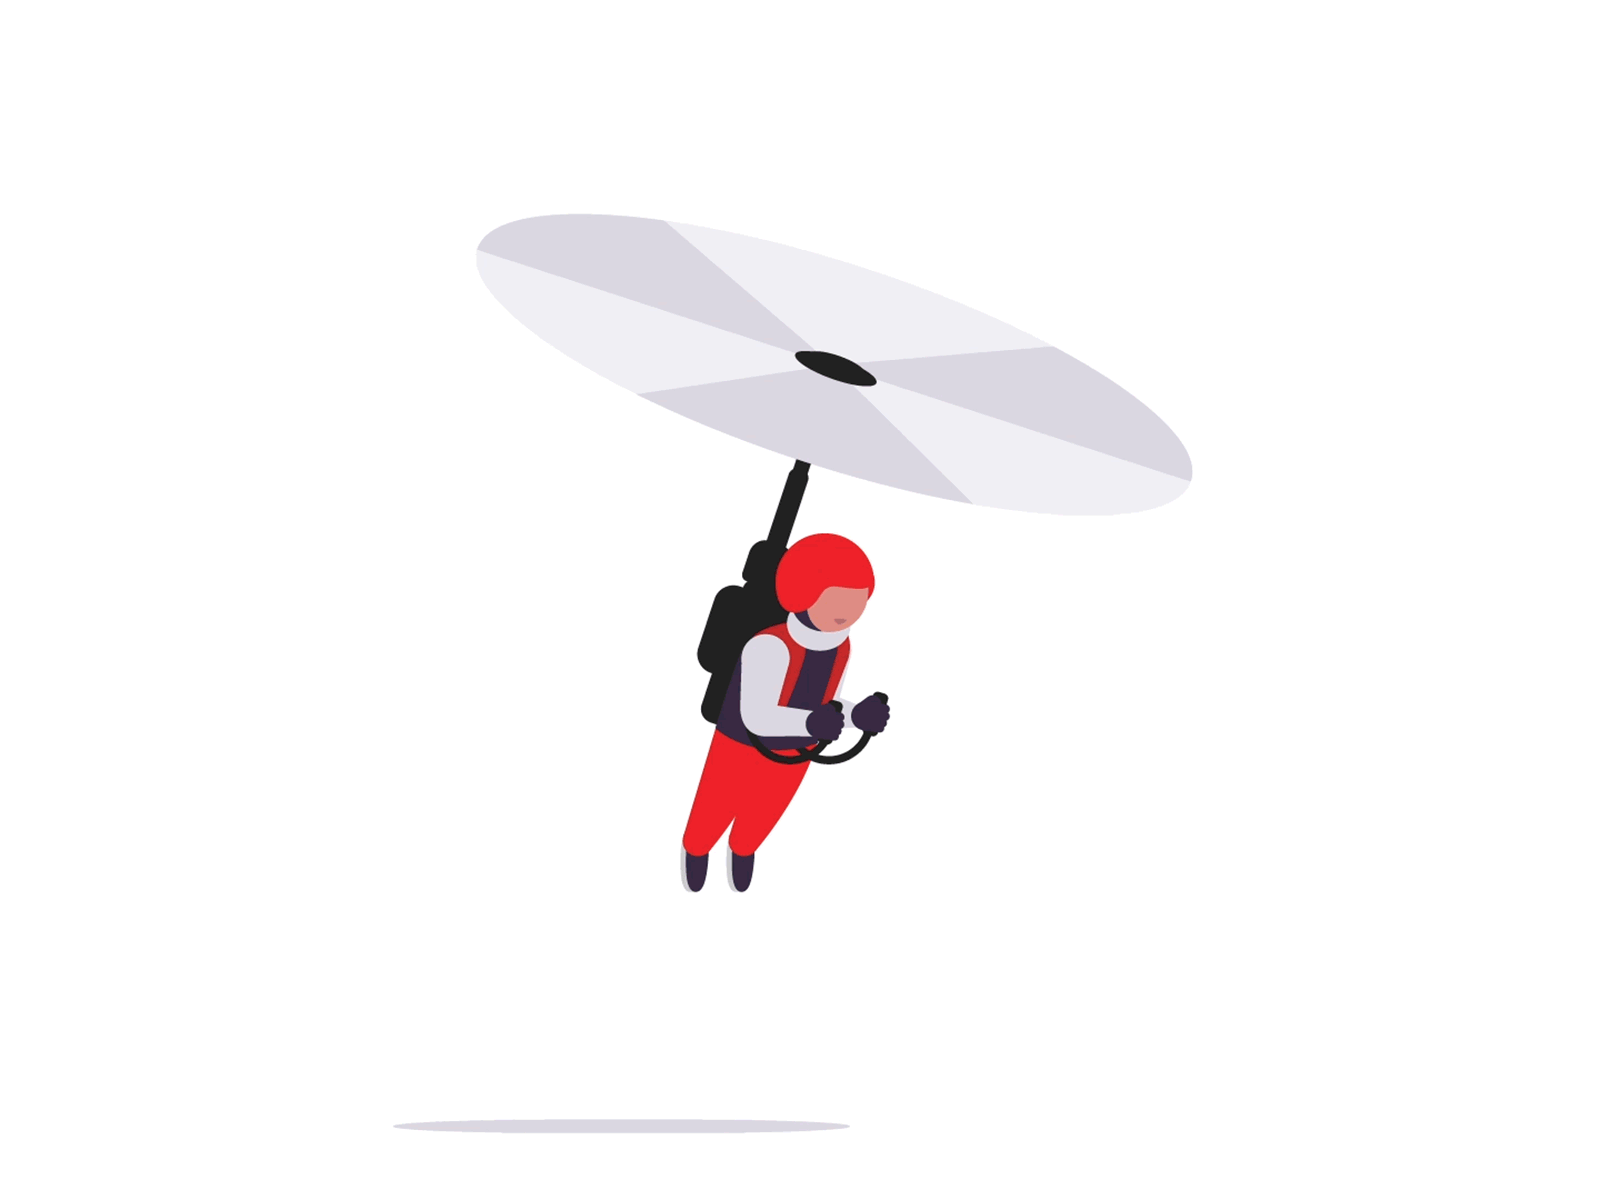 Akbank Illustrations aftereffects android animation app banking fintech flying gif helicopter human illustration illustrator investments ios jetpack motion onboarding red technology uiux